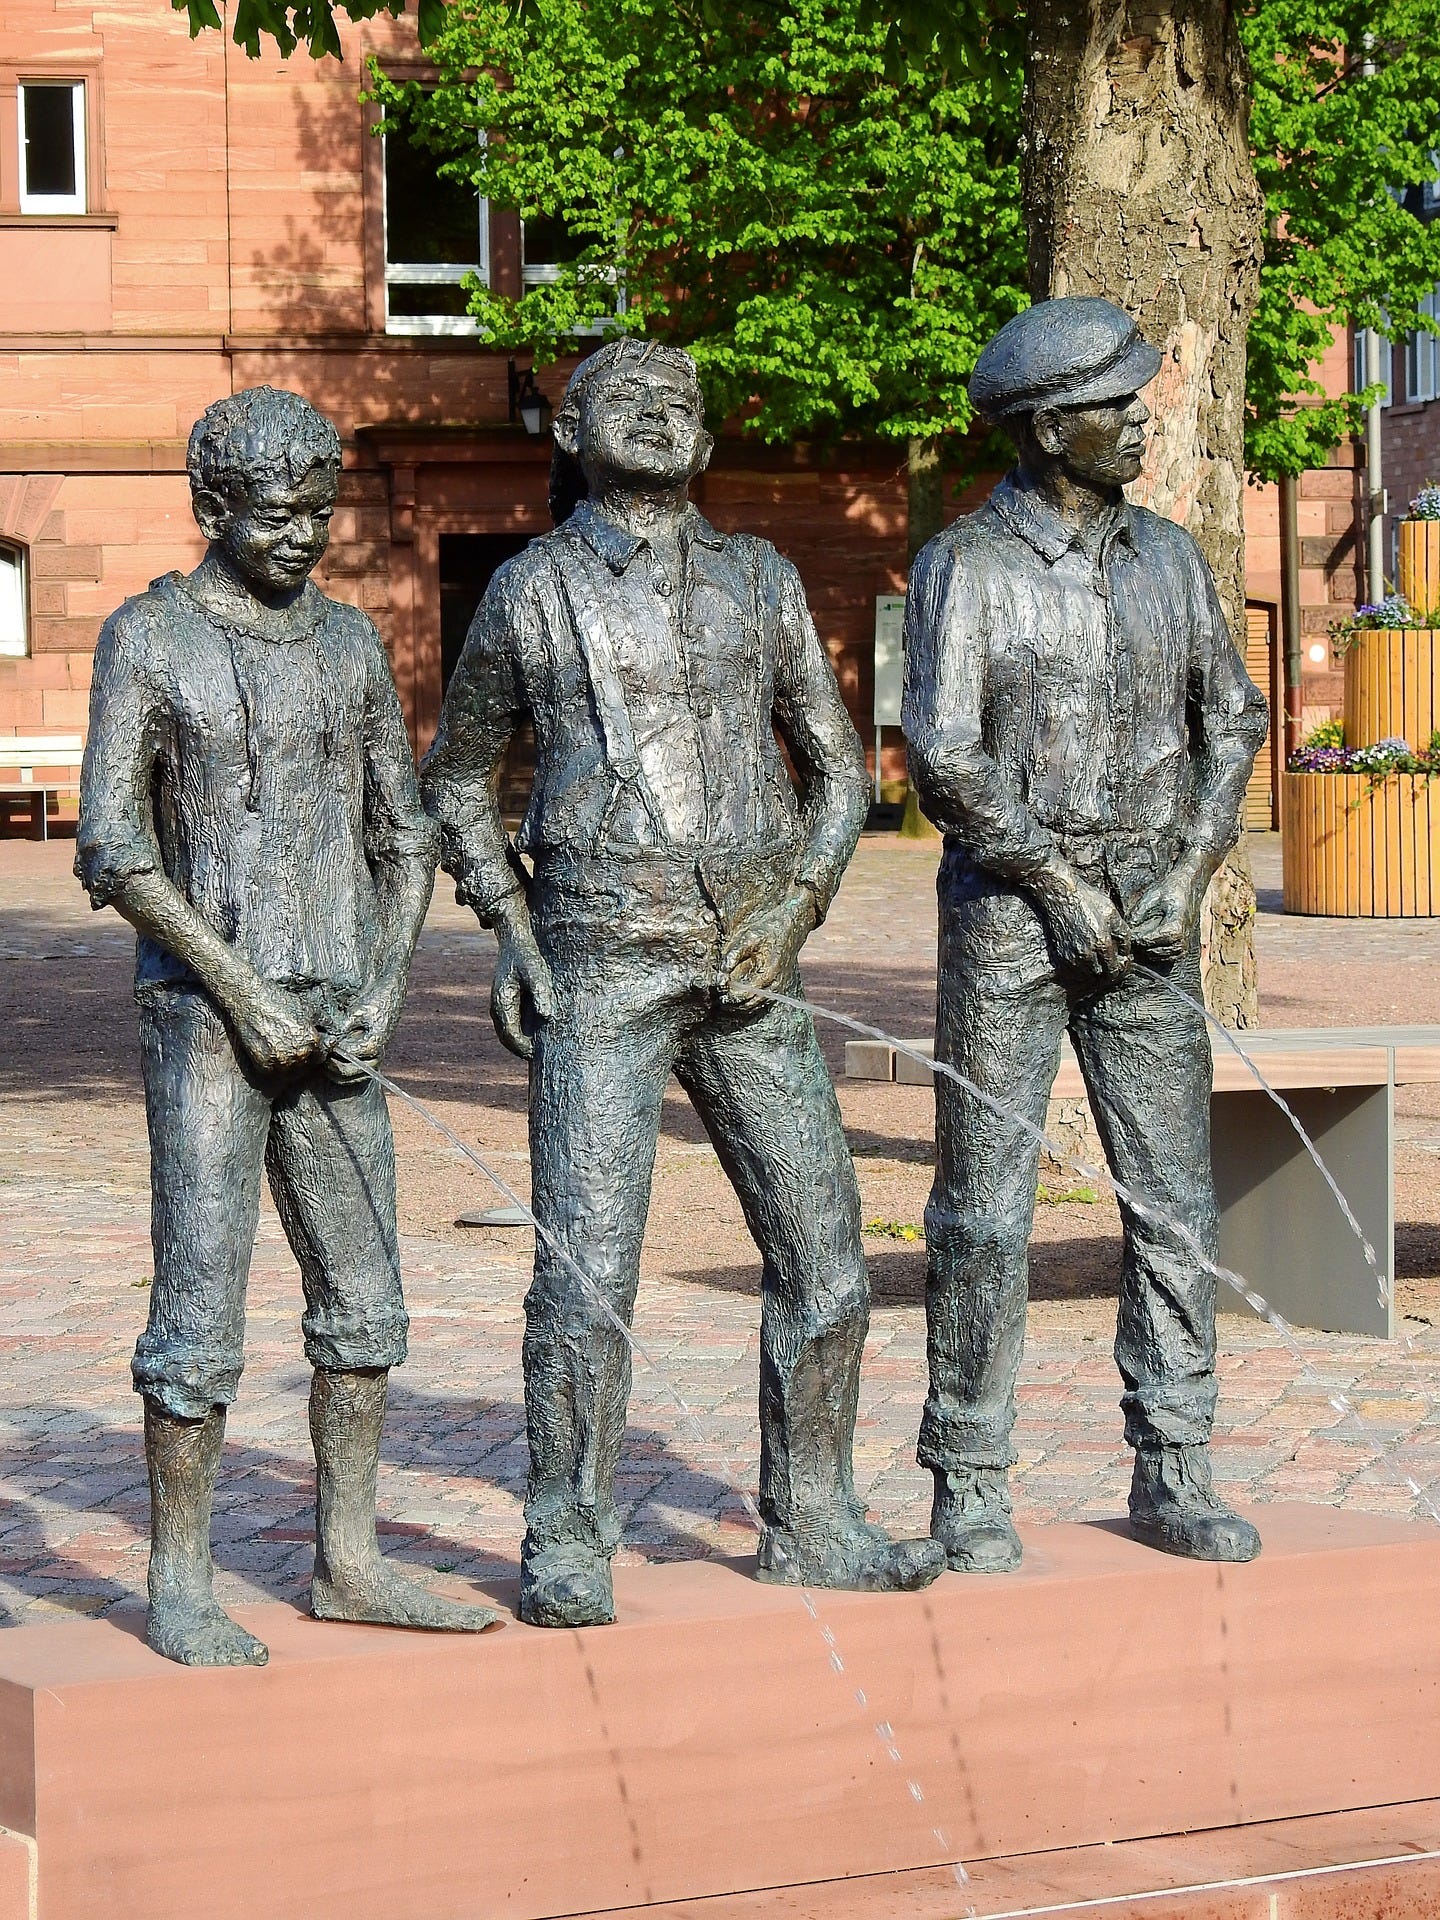 An odd sidewalk fountain depicting three young men in old-fashioned clothing, lined up, taking a piss. Each has a different facial expression.